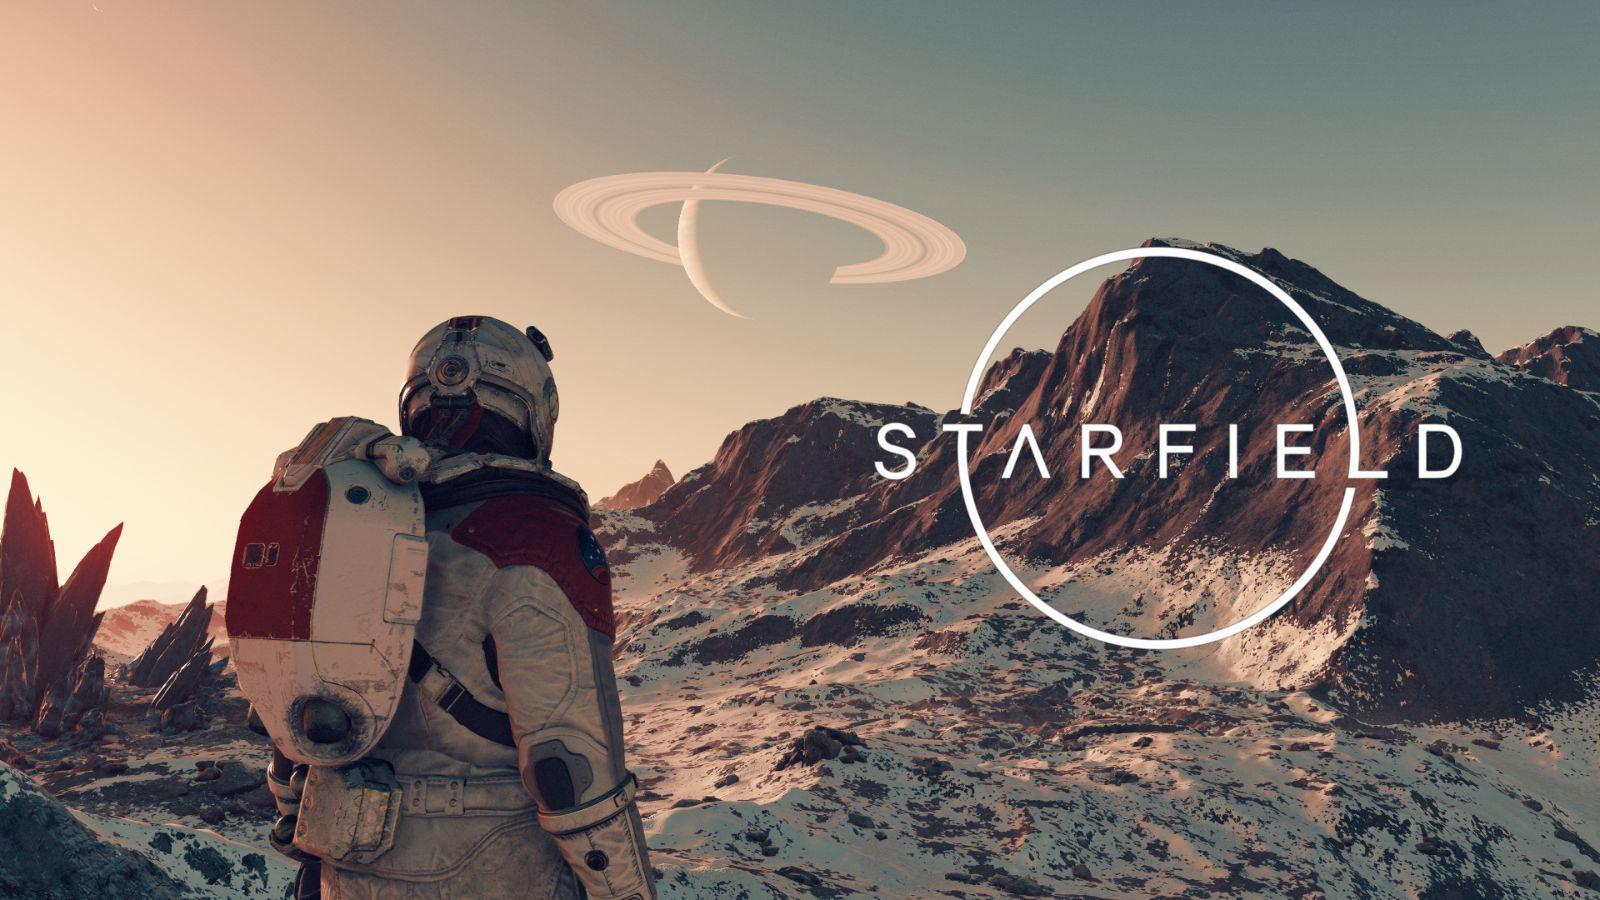 Character around mountains in Starfield